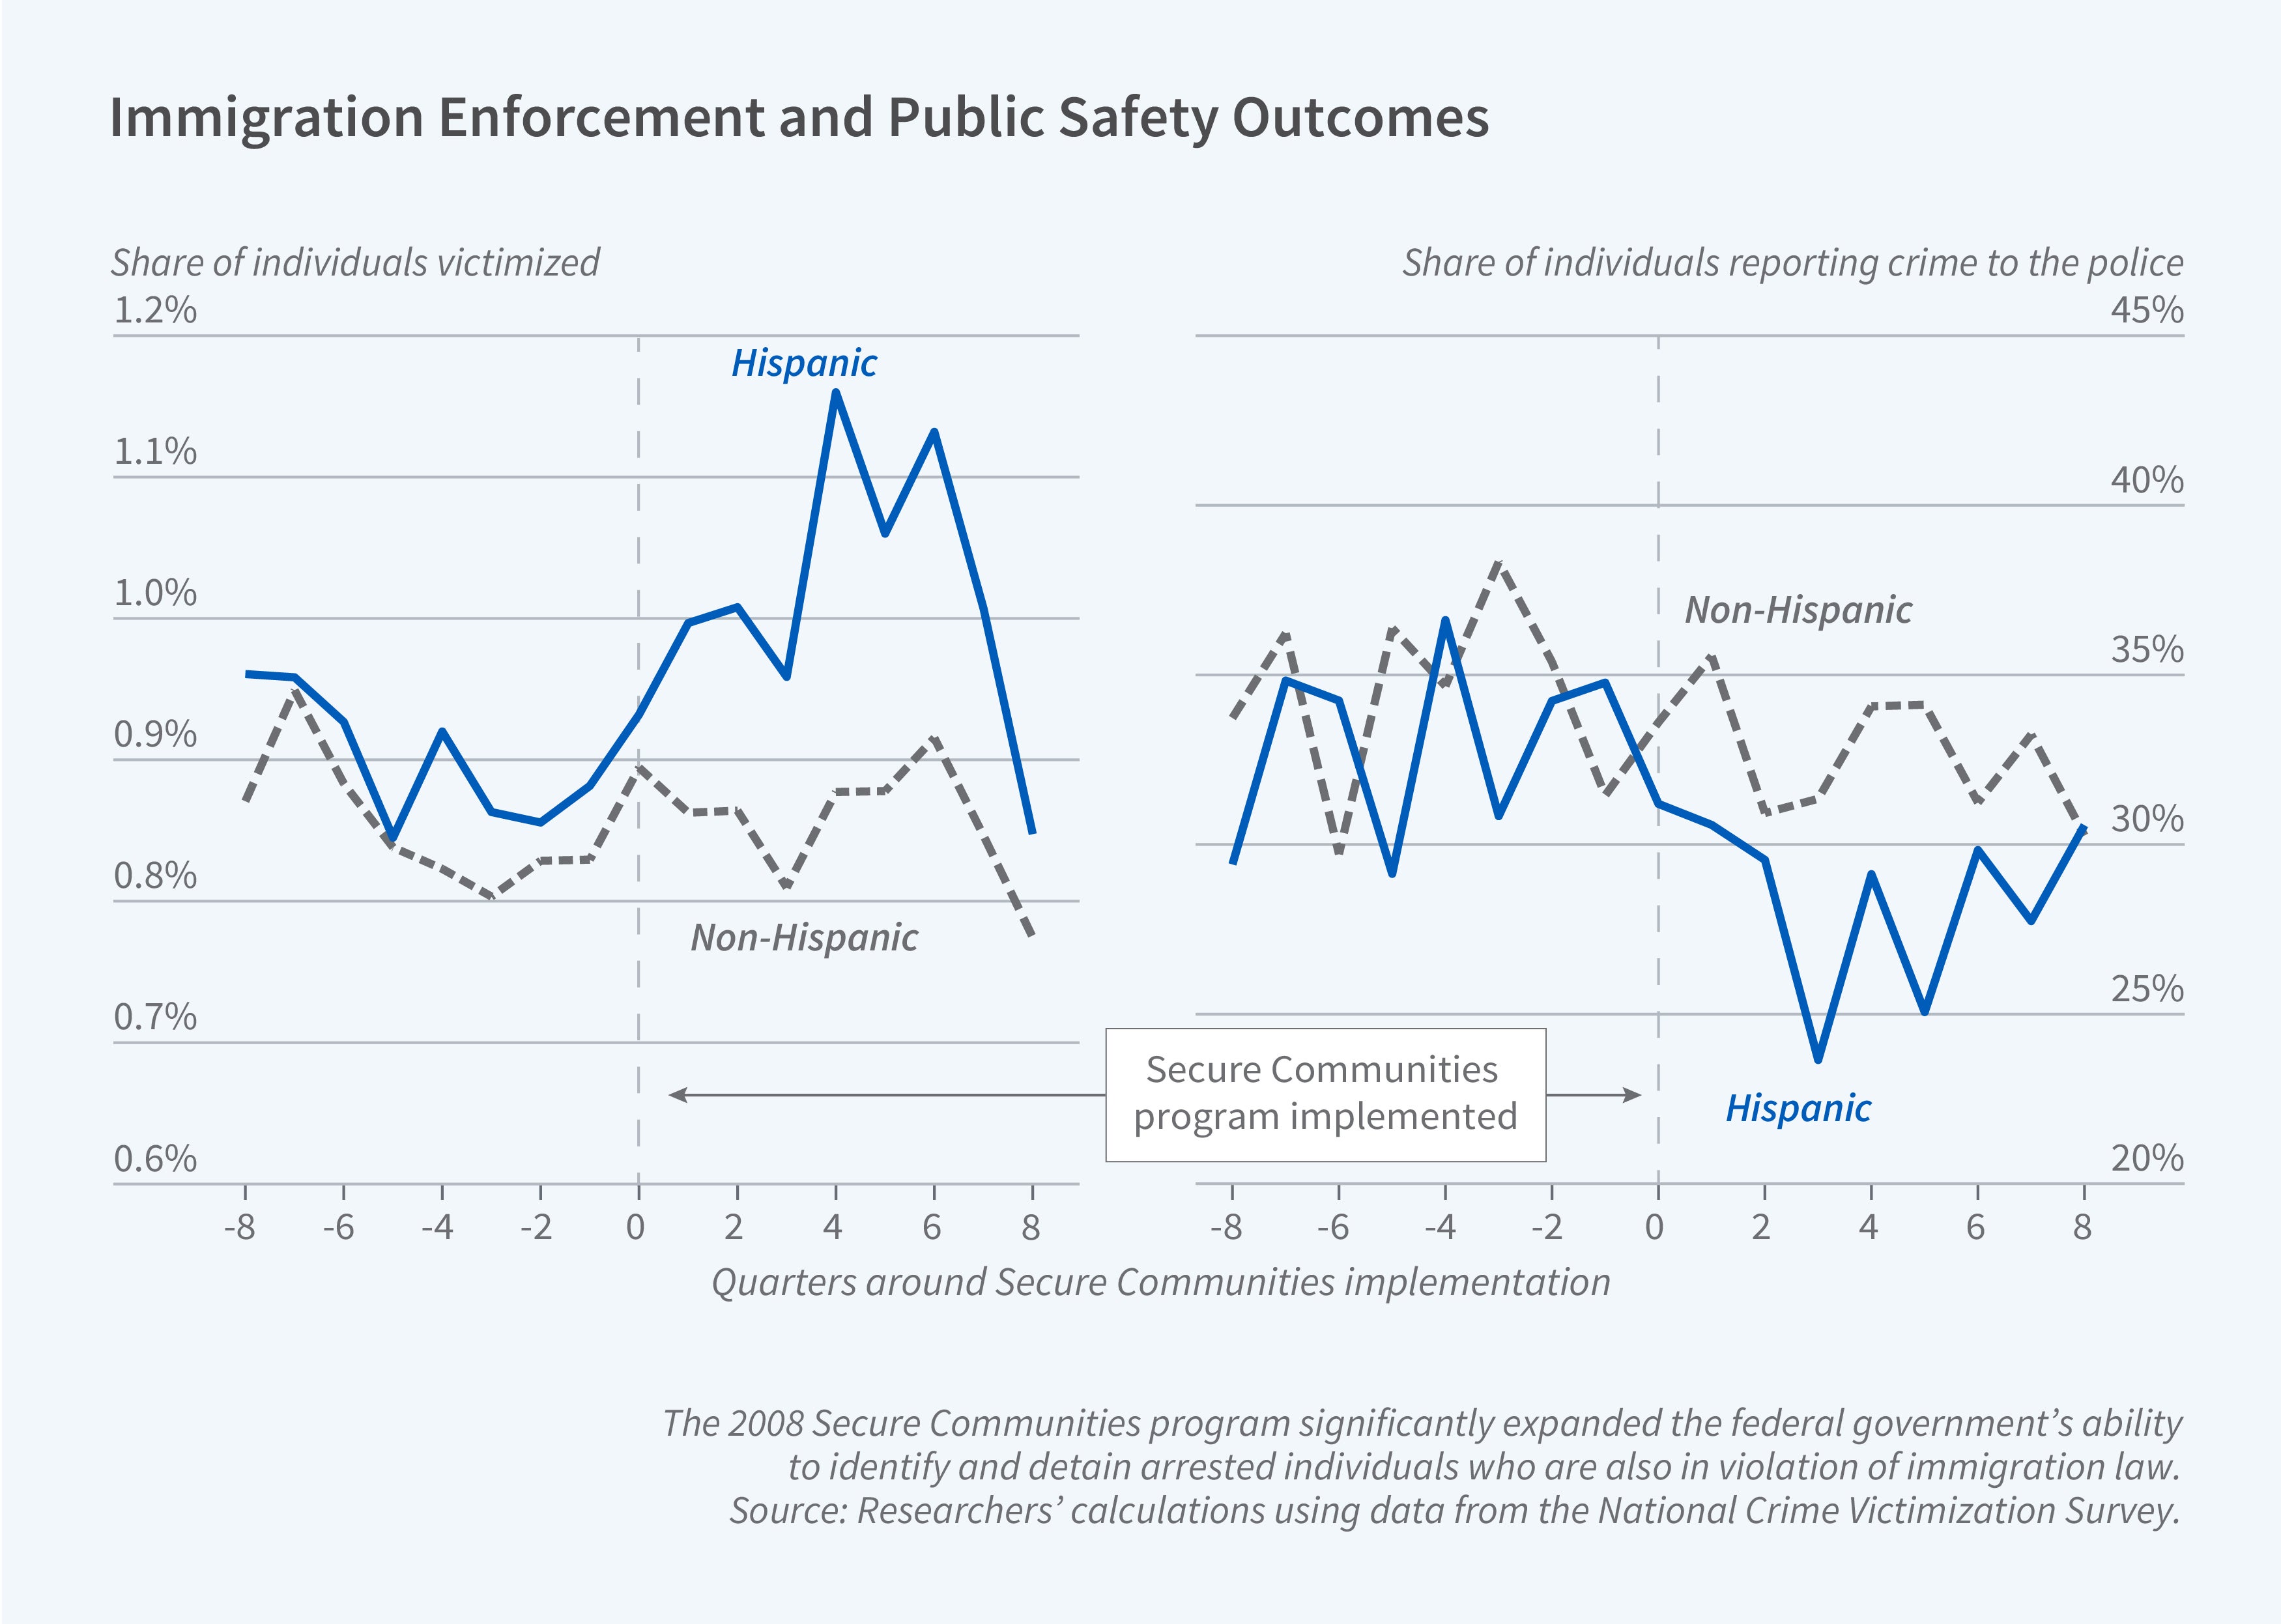 This figure is a two-panel line graph titled, Immigration Enforcement and Public Safety Outcomes. The following pertains to the left-side panel. The y-axis is labeled, share of individuals victimized. It ranges from 0.6% to 1.2%. The x-axis is labeled, quarters around secure communities implementation. It ranges from negative 8 to 8. There is a vertical dotted line at 0 that is labeled, Secure Communities Program implemented. The graph features two lines: Hispanic and Non-Hispanic, representing trends before and after the implementation of the Secure Communities program. The Hispanic line begins at approximately 0.95% and slightly declines to around 0.875% before the program's start. Following the implementation, the line sharply increases to about 1.15% at 4 quarters post-implementation. Subsequently, it drops significantly to roughly 0.85% at 8 quarters after the program's introduction. The Non-Hispanic line starts at around 0.9% and decreases to approximately 0.825% prior to the program's commencement. After the implementation, the line remains relatively stable, fluctuating between 0.8% and 0.9%, with minor variations. At 8 quarters post-implementation, the Non-Hispanic line concludes just below 0.8%. The following pertains to the right-side panel. The y-axis is labeled, share of individuals reporting crimes to the police. It ranges from 20% to 45%, increasing in increments in of 5%. The x-axis is labeled, quarters around secure communities implementation. It ranges from negative 8 to 8. There is a vertical dotted line at 0 that is labeled, Secure Communities Program implemented. The graph features two lines: Hispanic and Non-Hispanic, representing trends before and after the implementation of the Secure Communities program. Before the start of the program, the Hispanic and Non-Hispanic lines exhibit inverted trends, with fluctuations between 30% and 37.5%. When the Hispanic line increases, the Non-Hispanic line decreases, and vice versa. After the program's implementation, the two lines diverge. The Non-Hispanic line experiences fluctuations between 30% and 35%, while the Hispanic line sees a steep decline, falling below 25% at 3 quarters following the implementation. However, both lines converge towards 30% at 8 quarters after the program's introduction, suggesting a narrowing of the gap between the two groups over time.The following pertain to both panels. The note on the figure reads, The 2008 Secure Communities program significantly expanded the federal government’s ability to identify and detain arrested individuals who are also in violation of immigration law. The source line reads, Source: Researchersʼ calculations using data from the National Crime Victimization Survey.